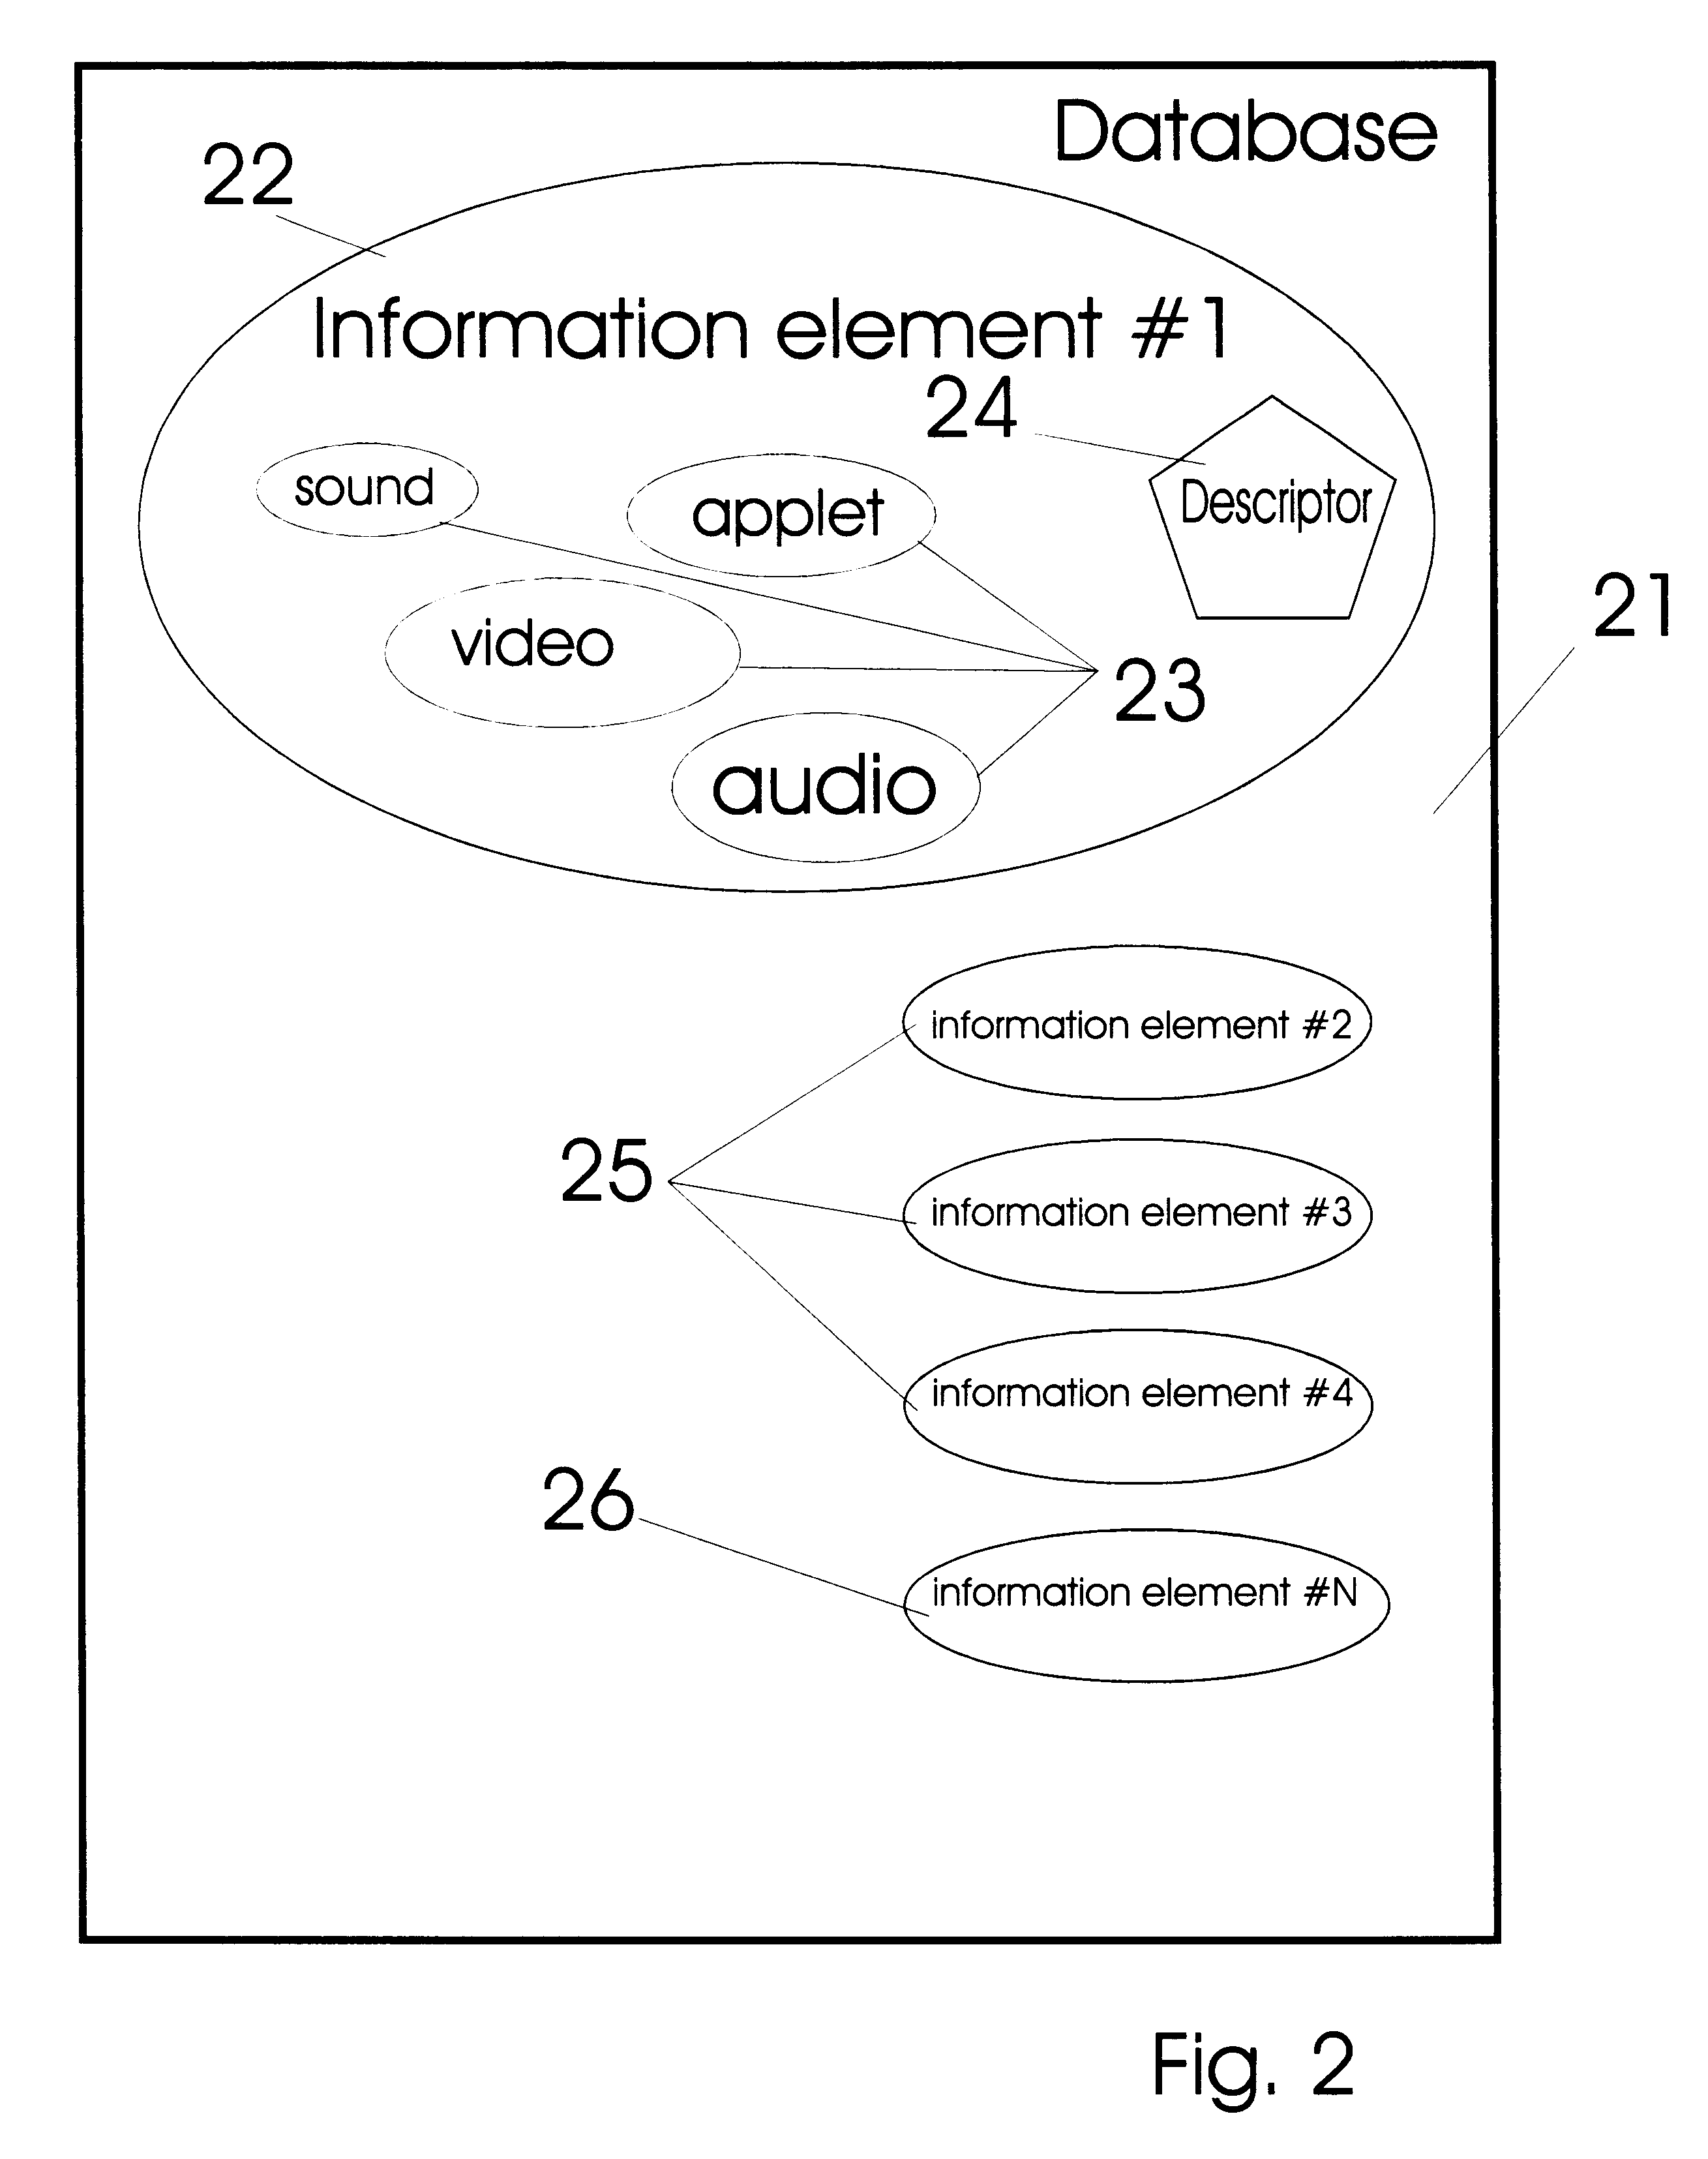 Apparatus and methods for presentation of information relating to objects being addressed